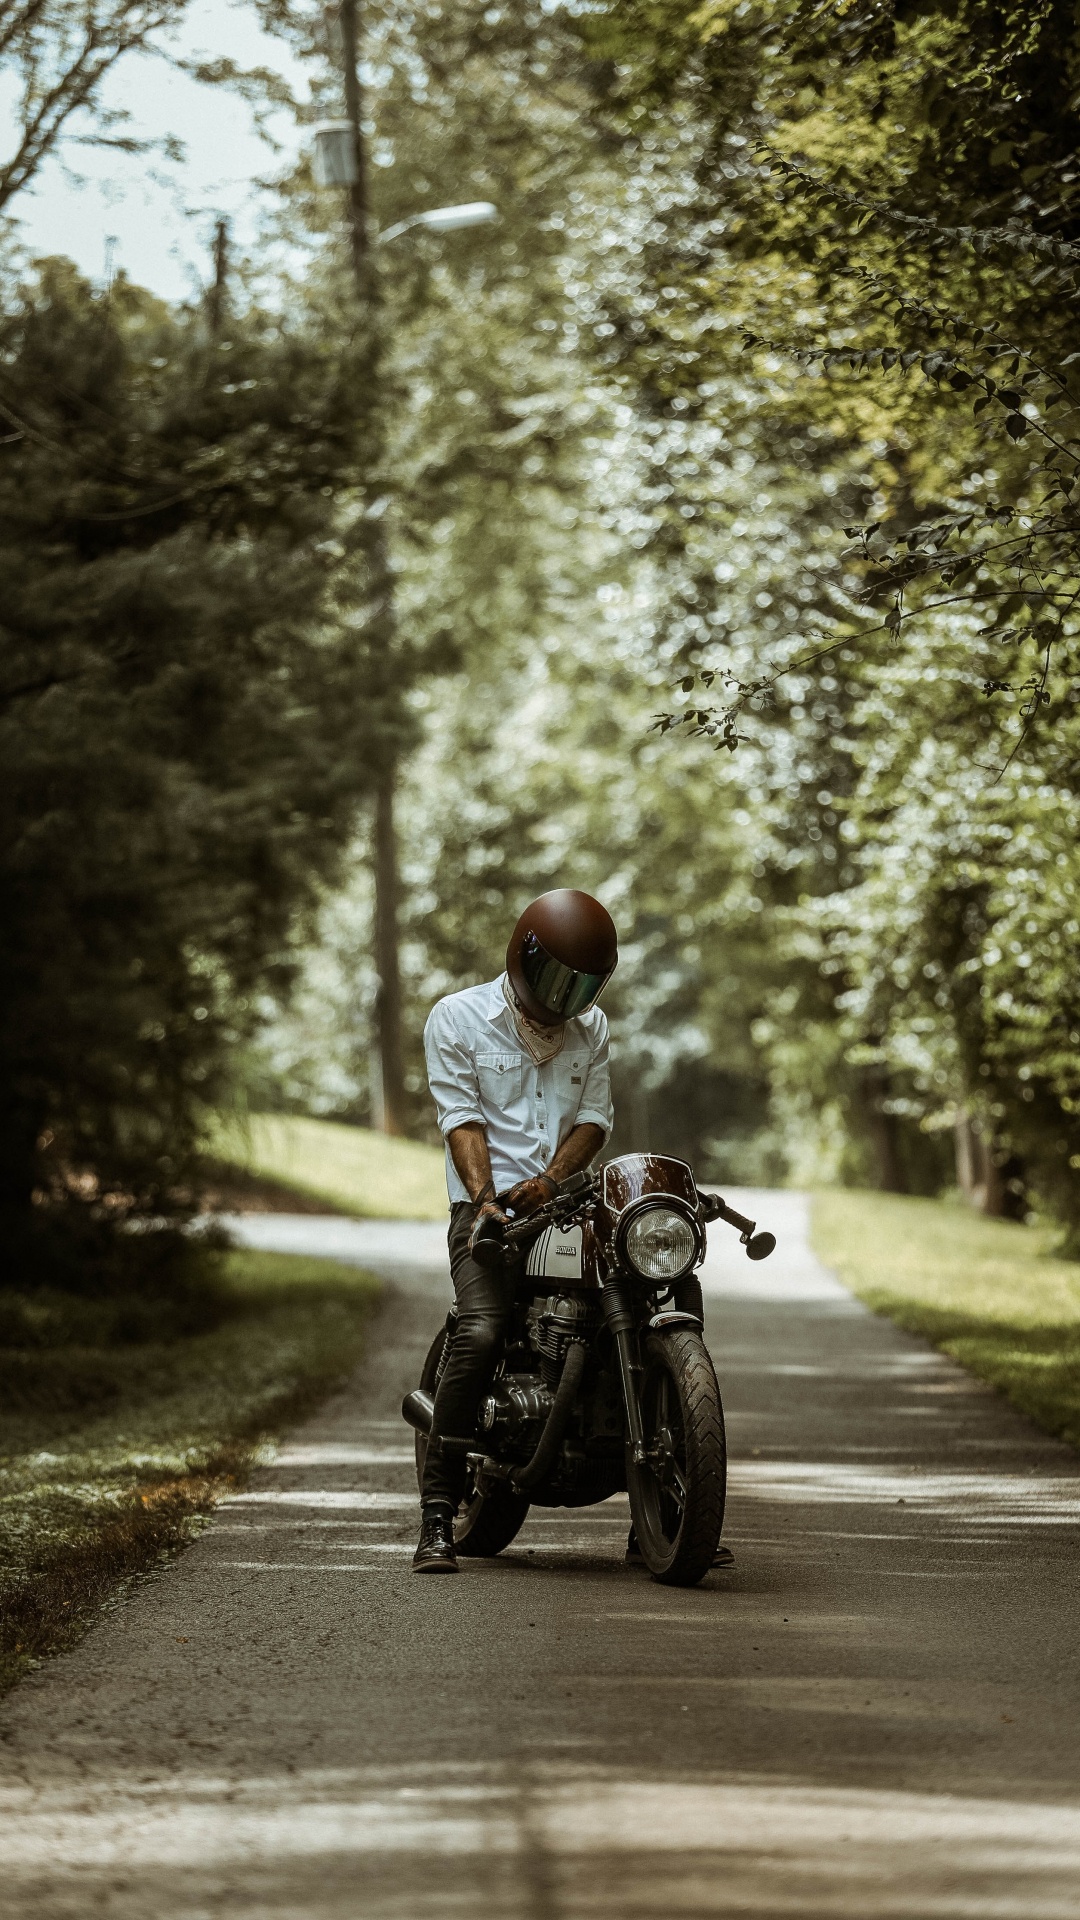 Man in White Shirt Riding Motorcycle on Road During Daytime. Wallpaper in 1080x1920 Resolution